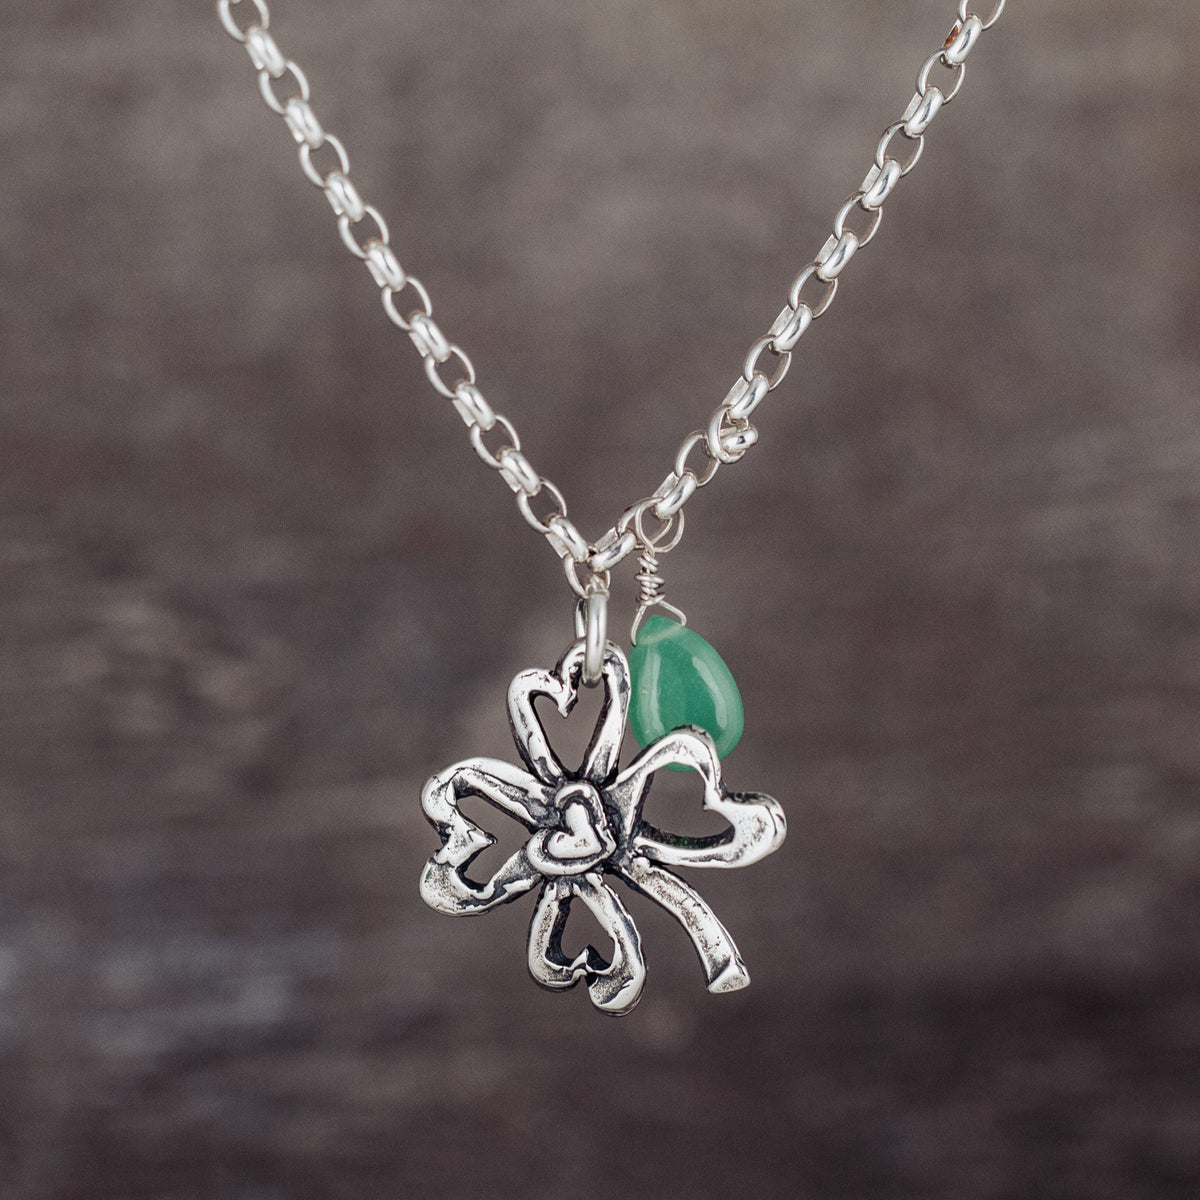 necklace with four leaf clover pendant